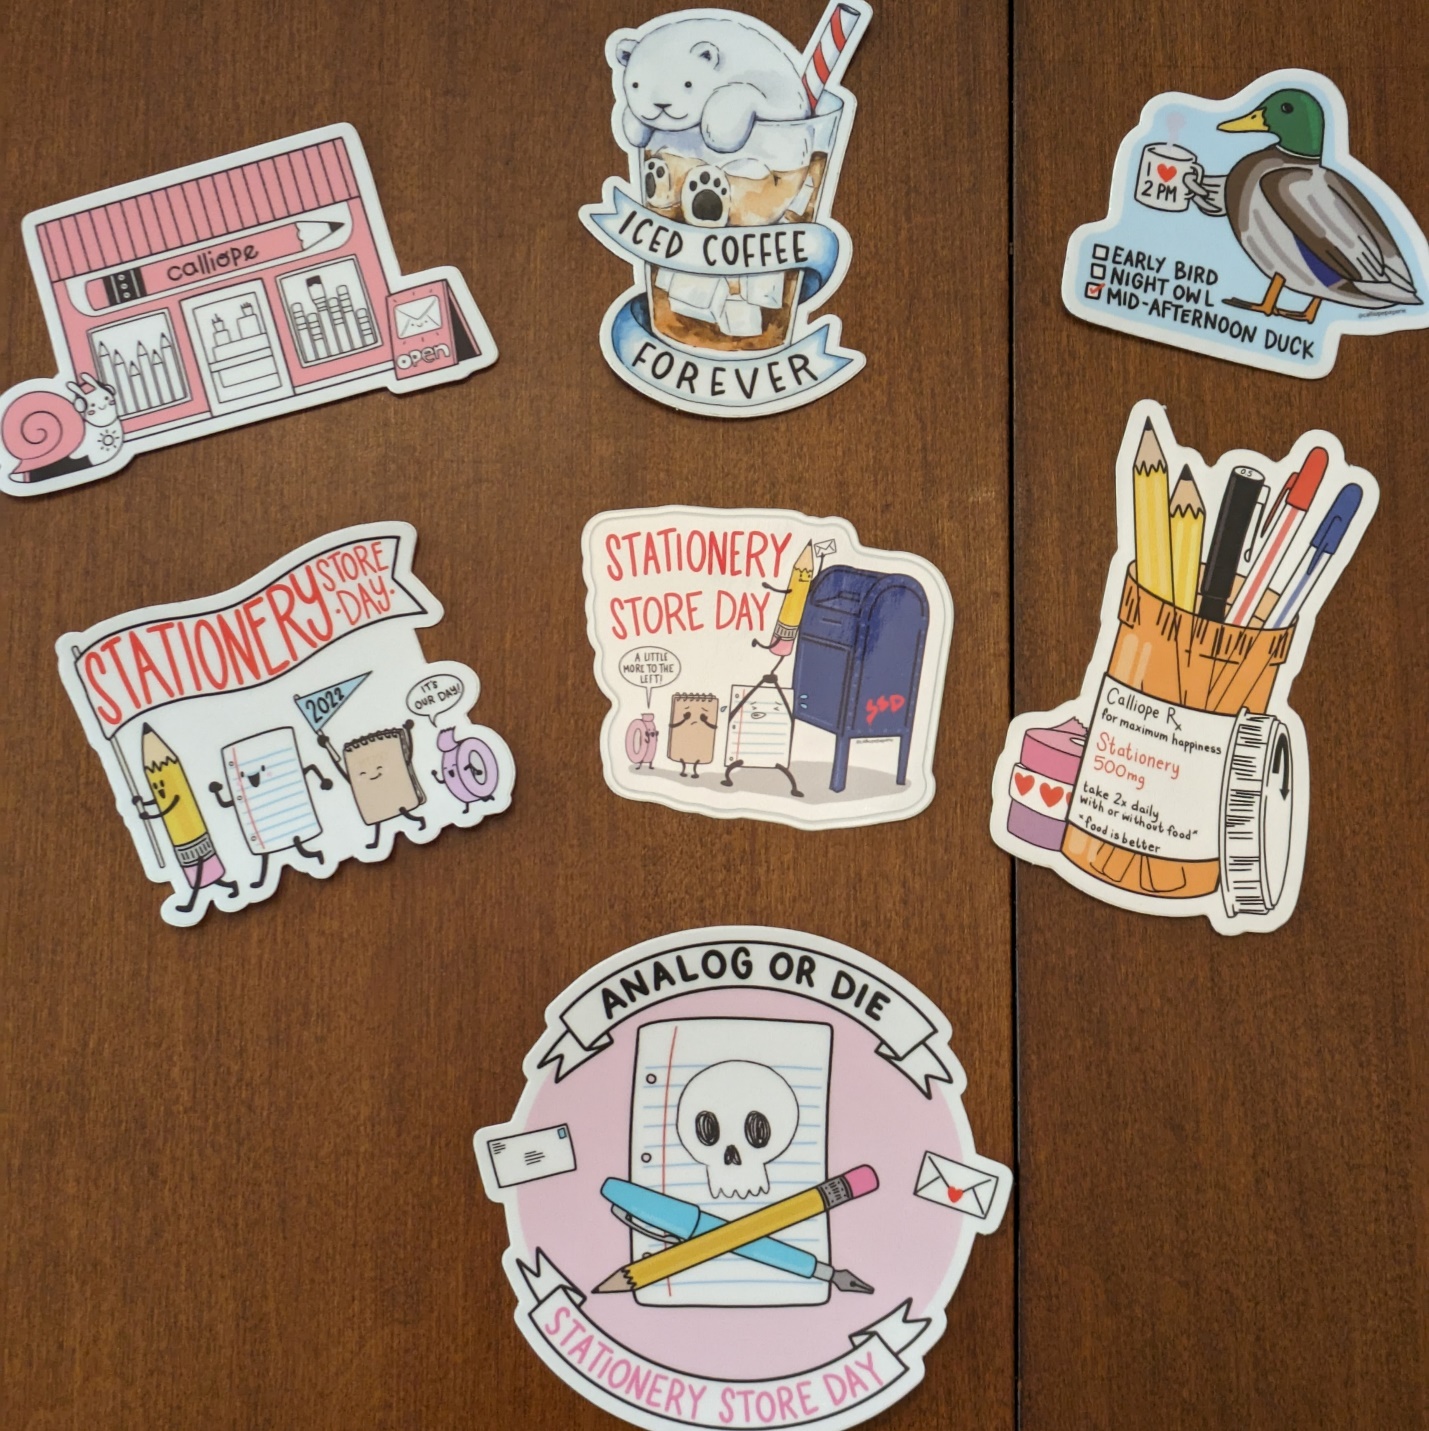 Calliope always has a great selection of stickers. Mid-afternoon duck speaks to me at a deep level. 